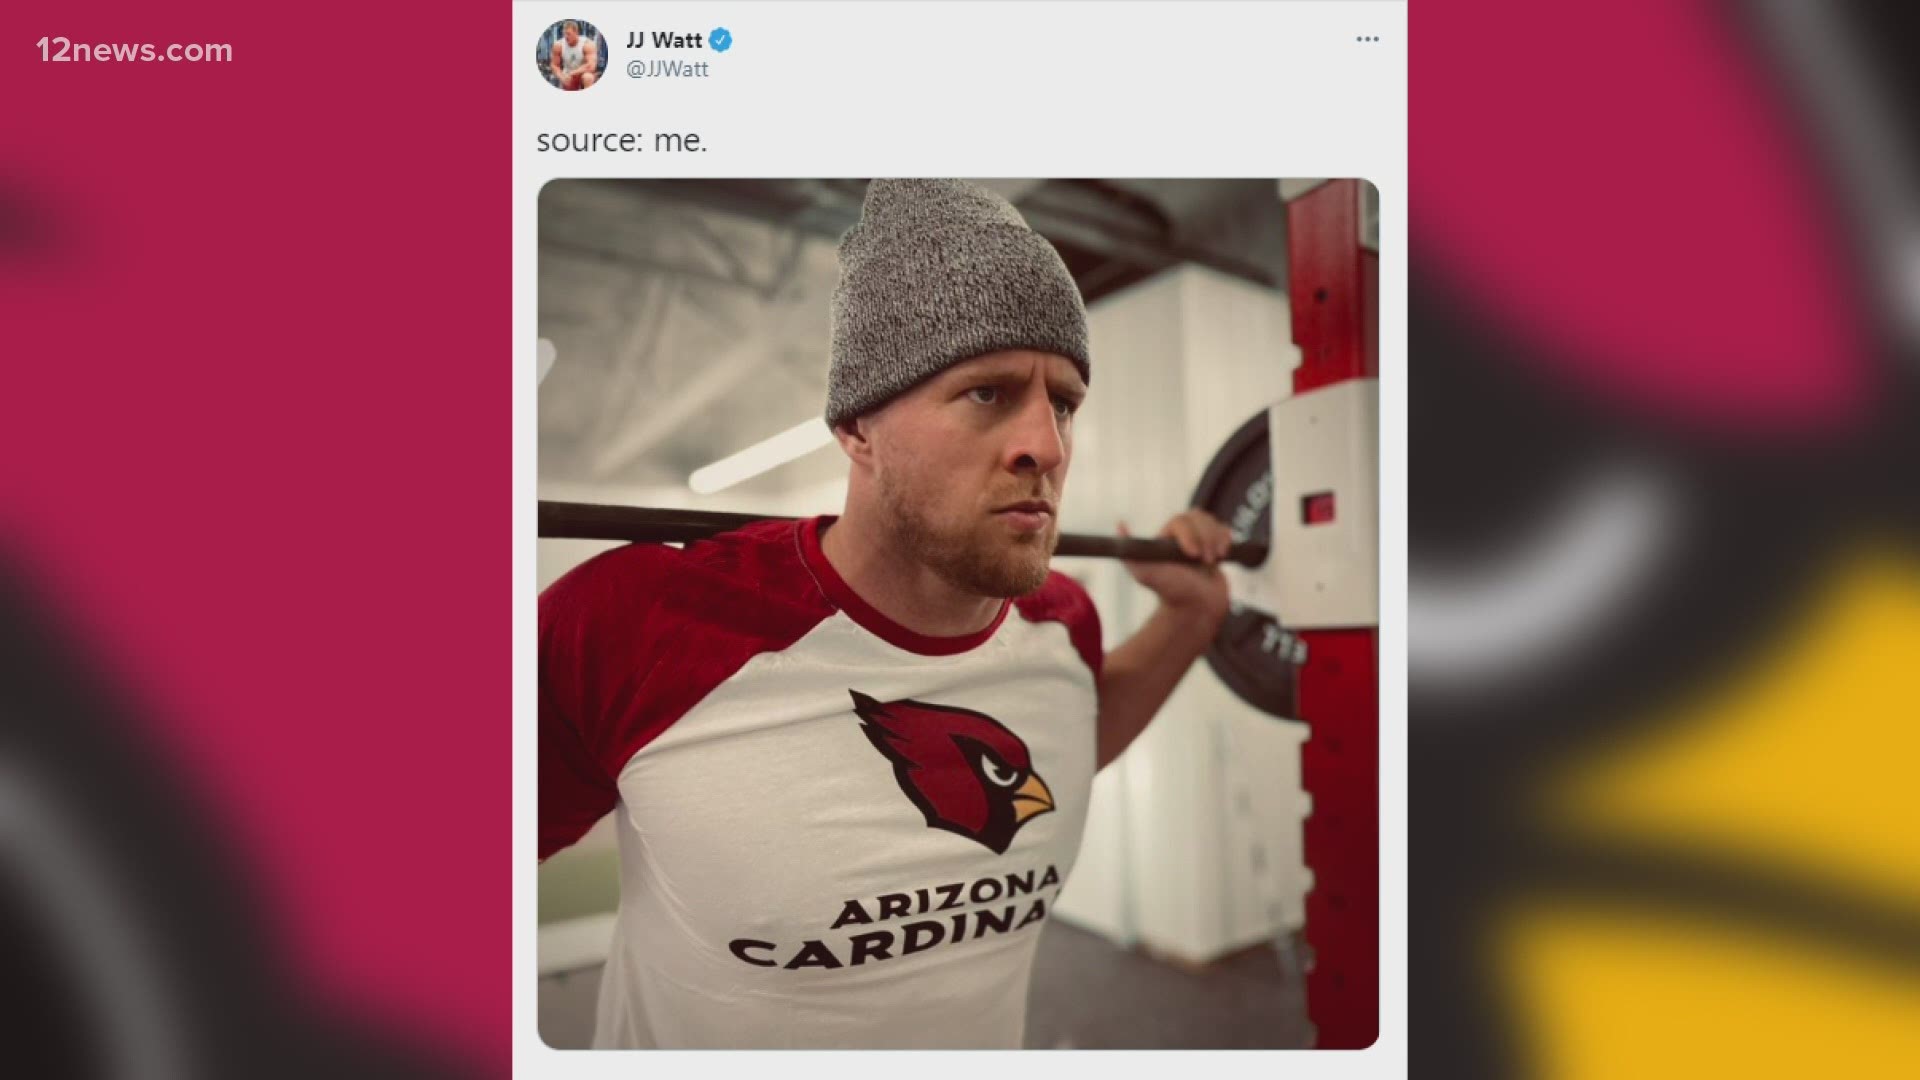 The so-called "experts" predicted that J.J. Watt would go to Cleveland, but boy, were they wrong! J.J. Watt is coming to Arizona and social media can't get enough!